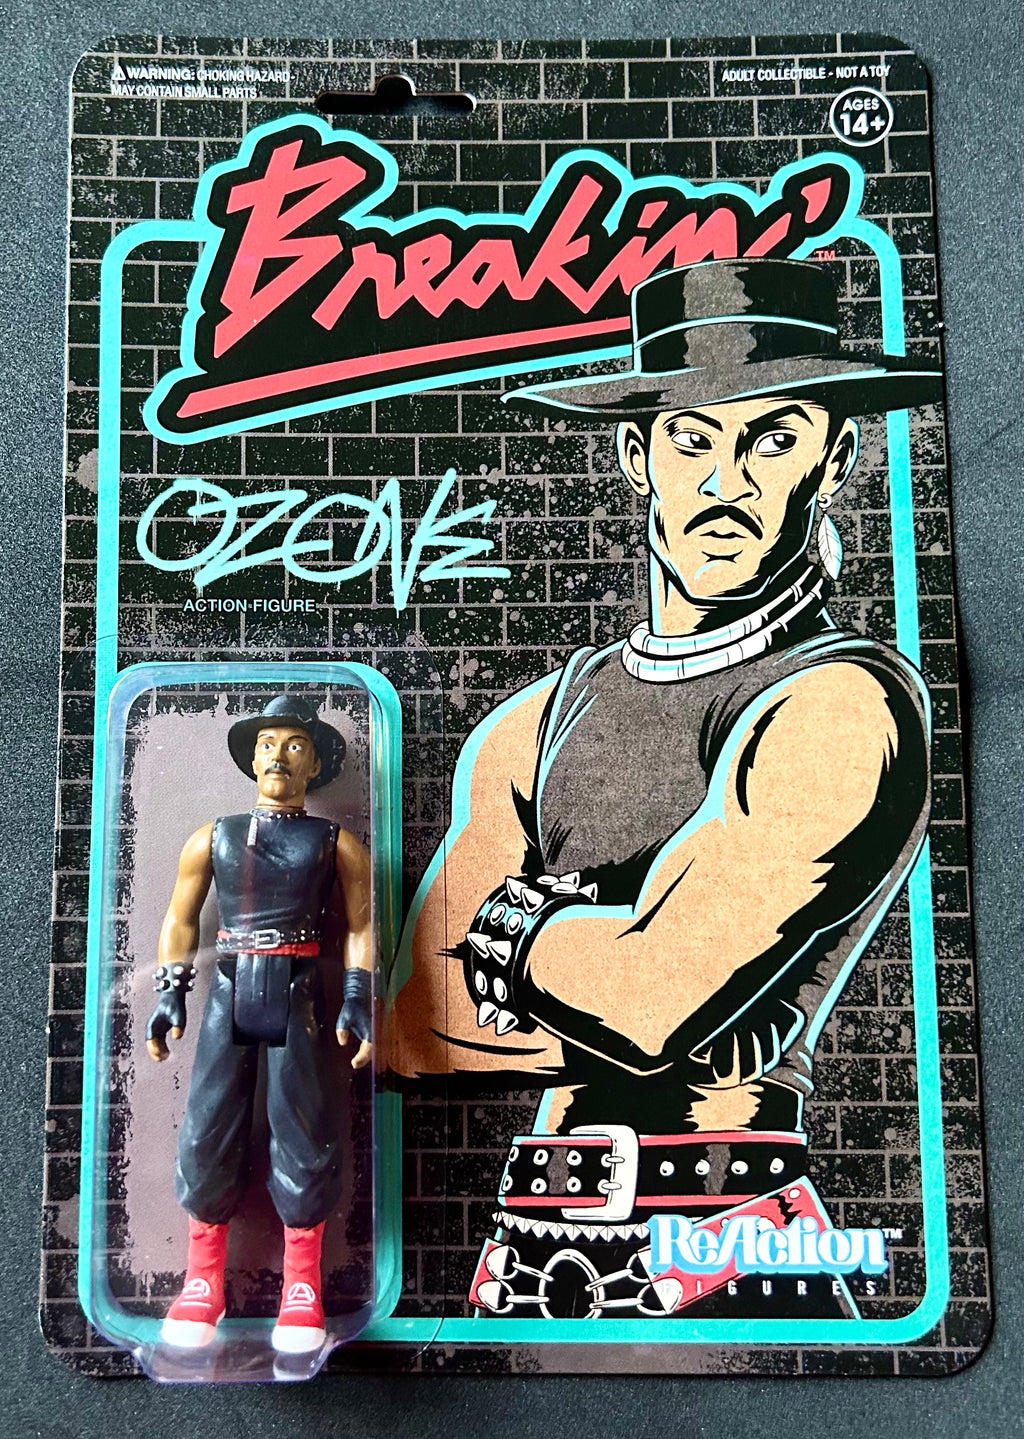 Breakin’ Super 7 Reaction Figures - Ozone, Turbo and Special K